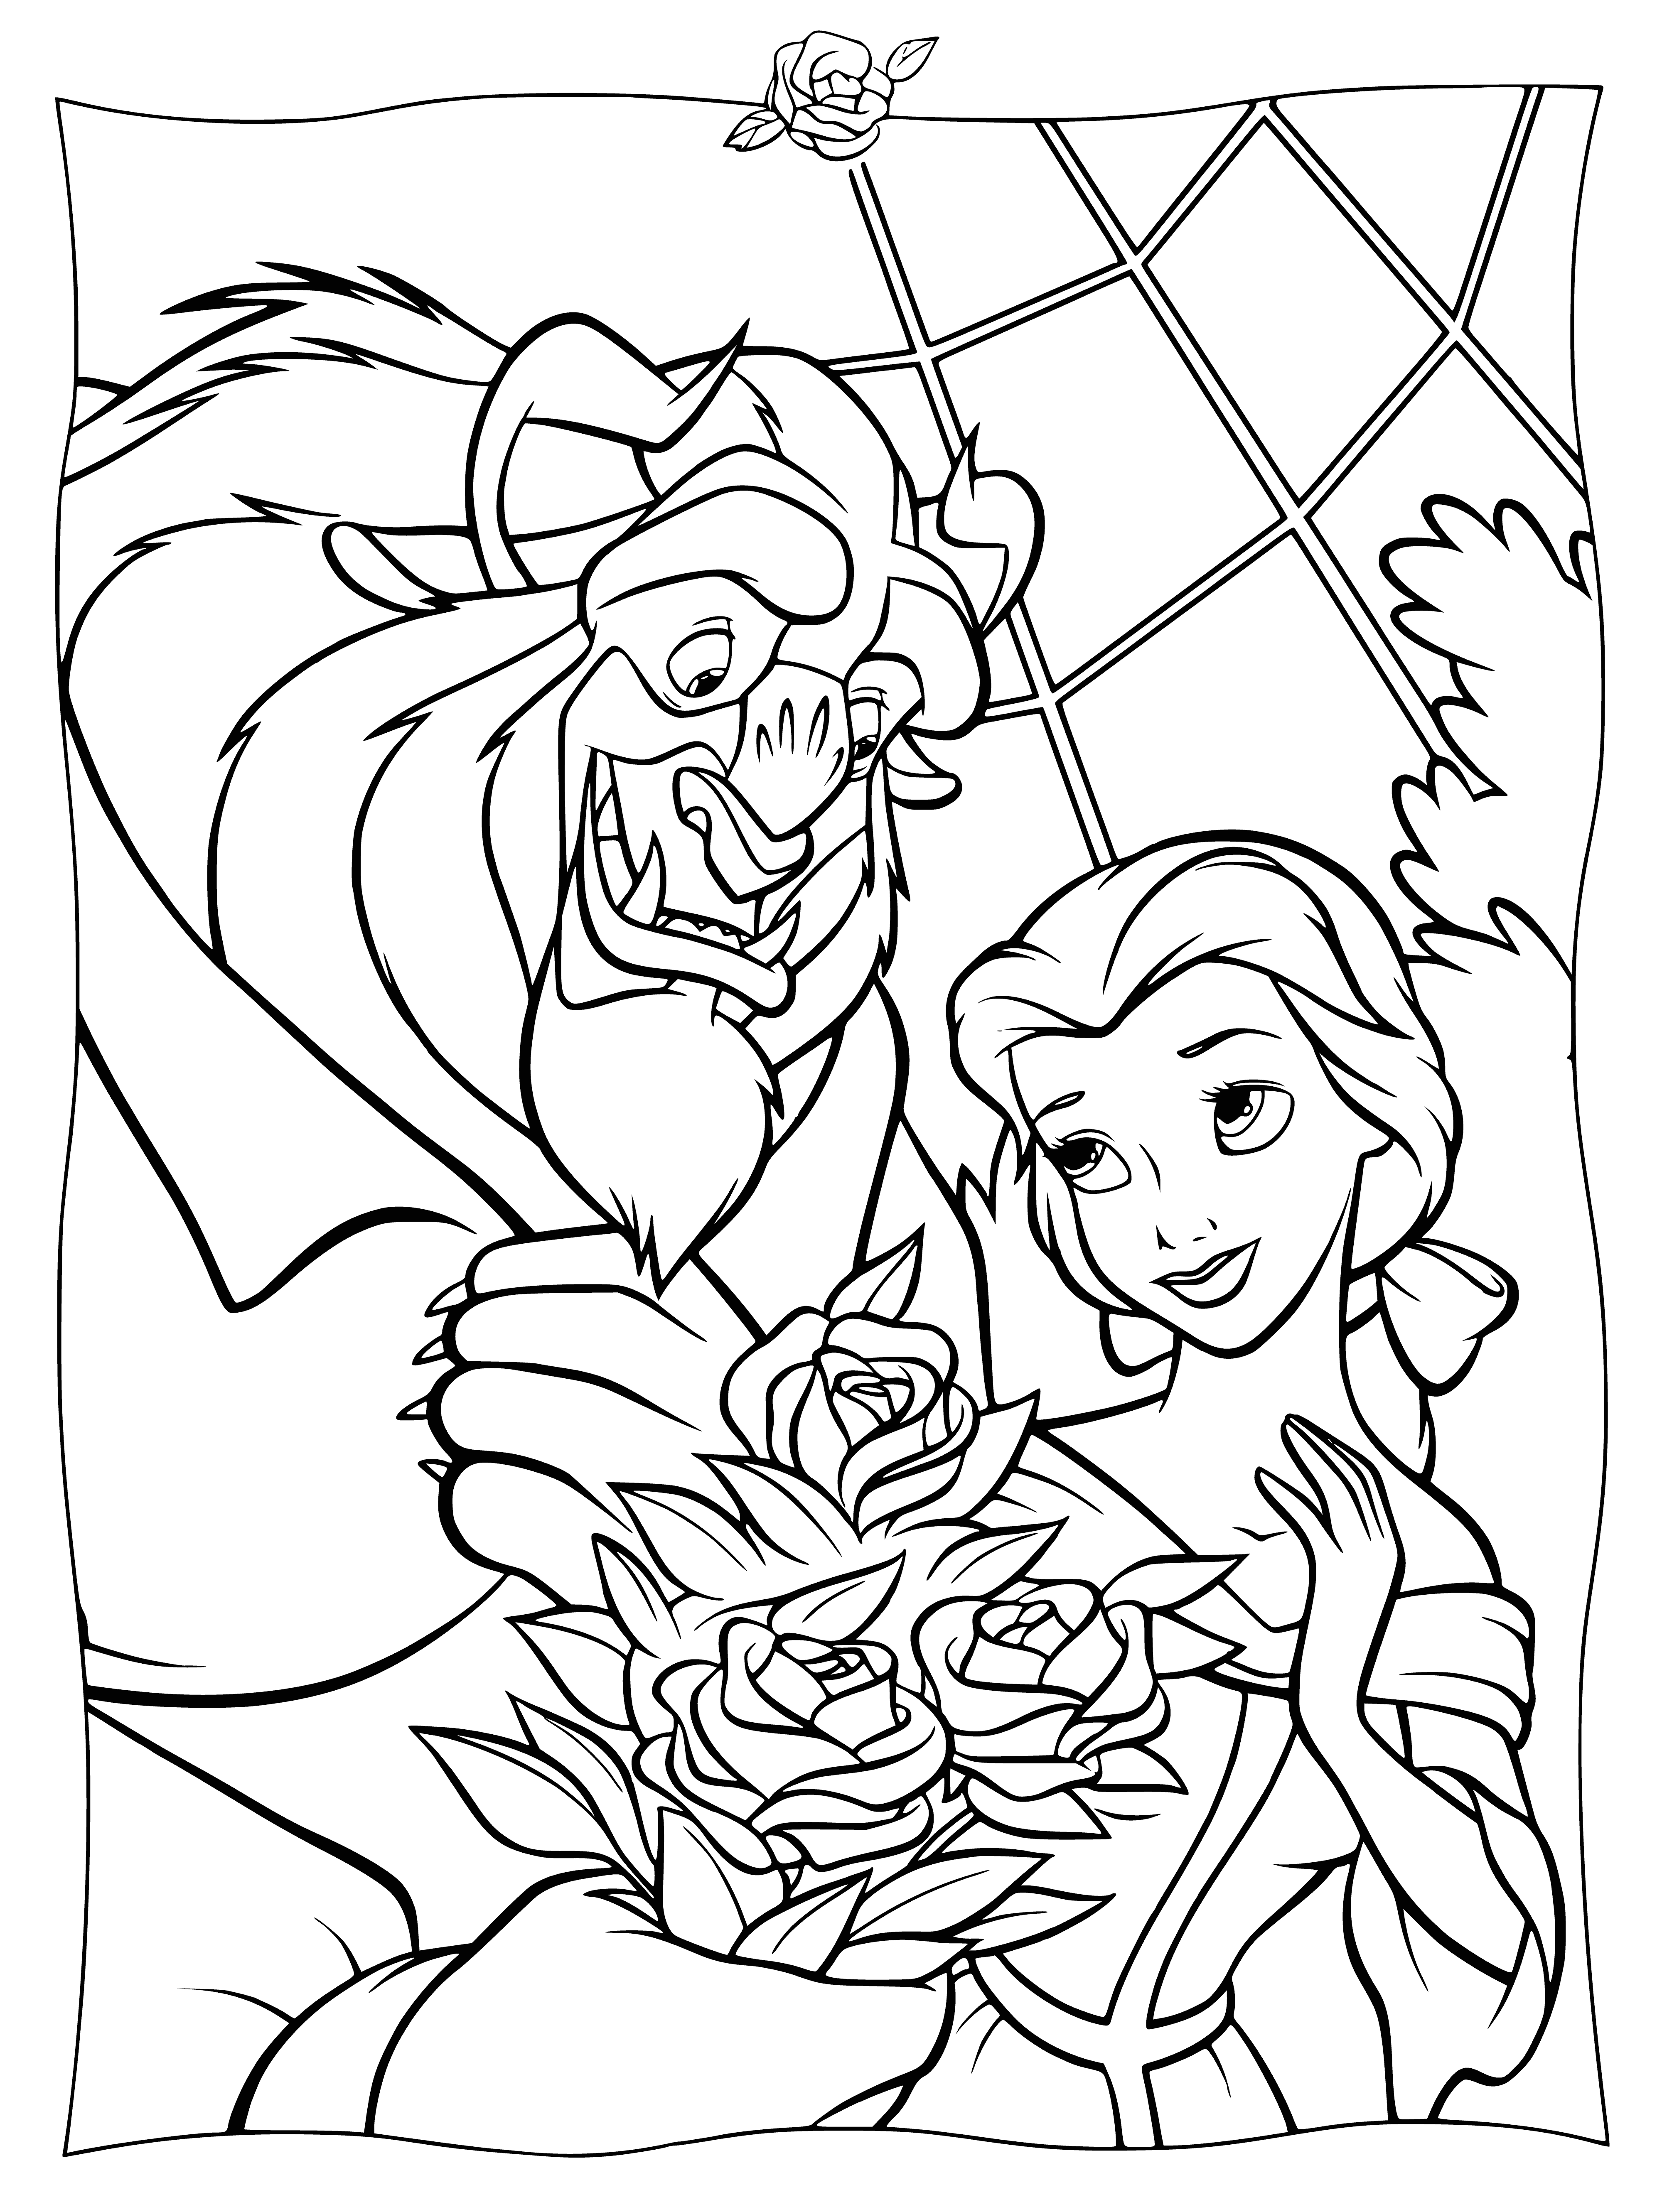 coloring page: The Beast & Belle stand facing each other, ready to fight. Beast is menacing and powerful; Belle is courageous and brave.